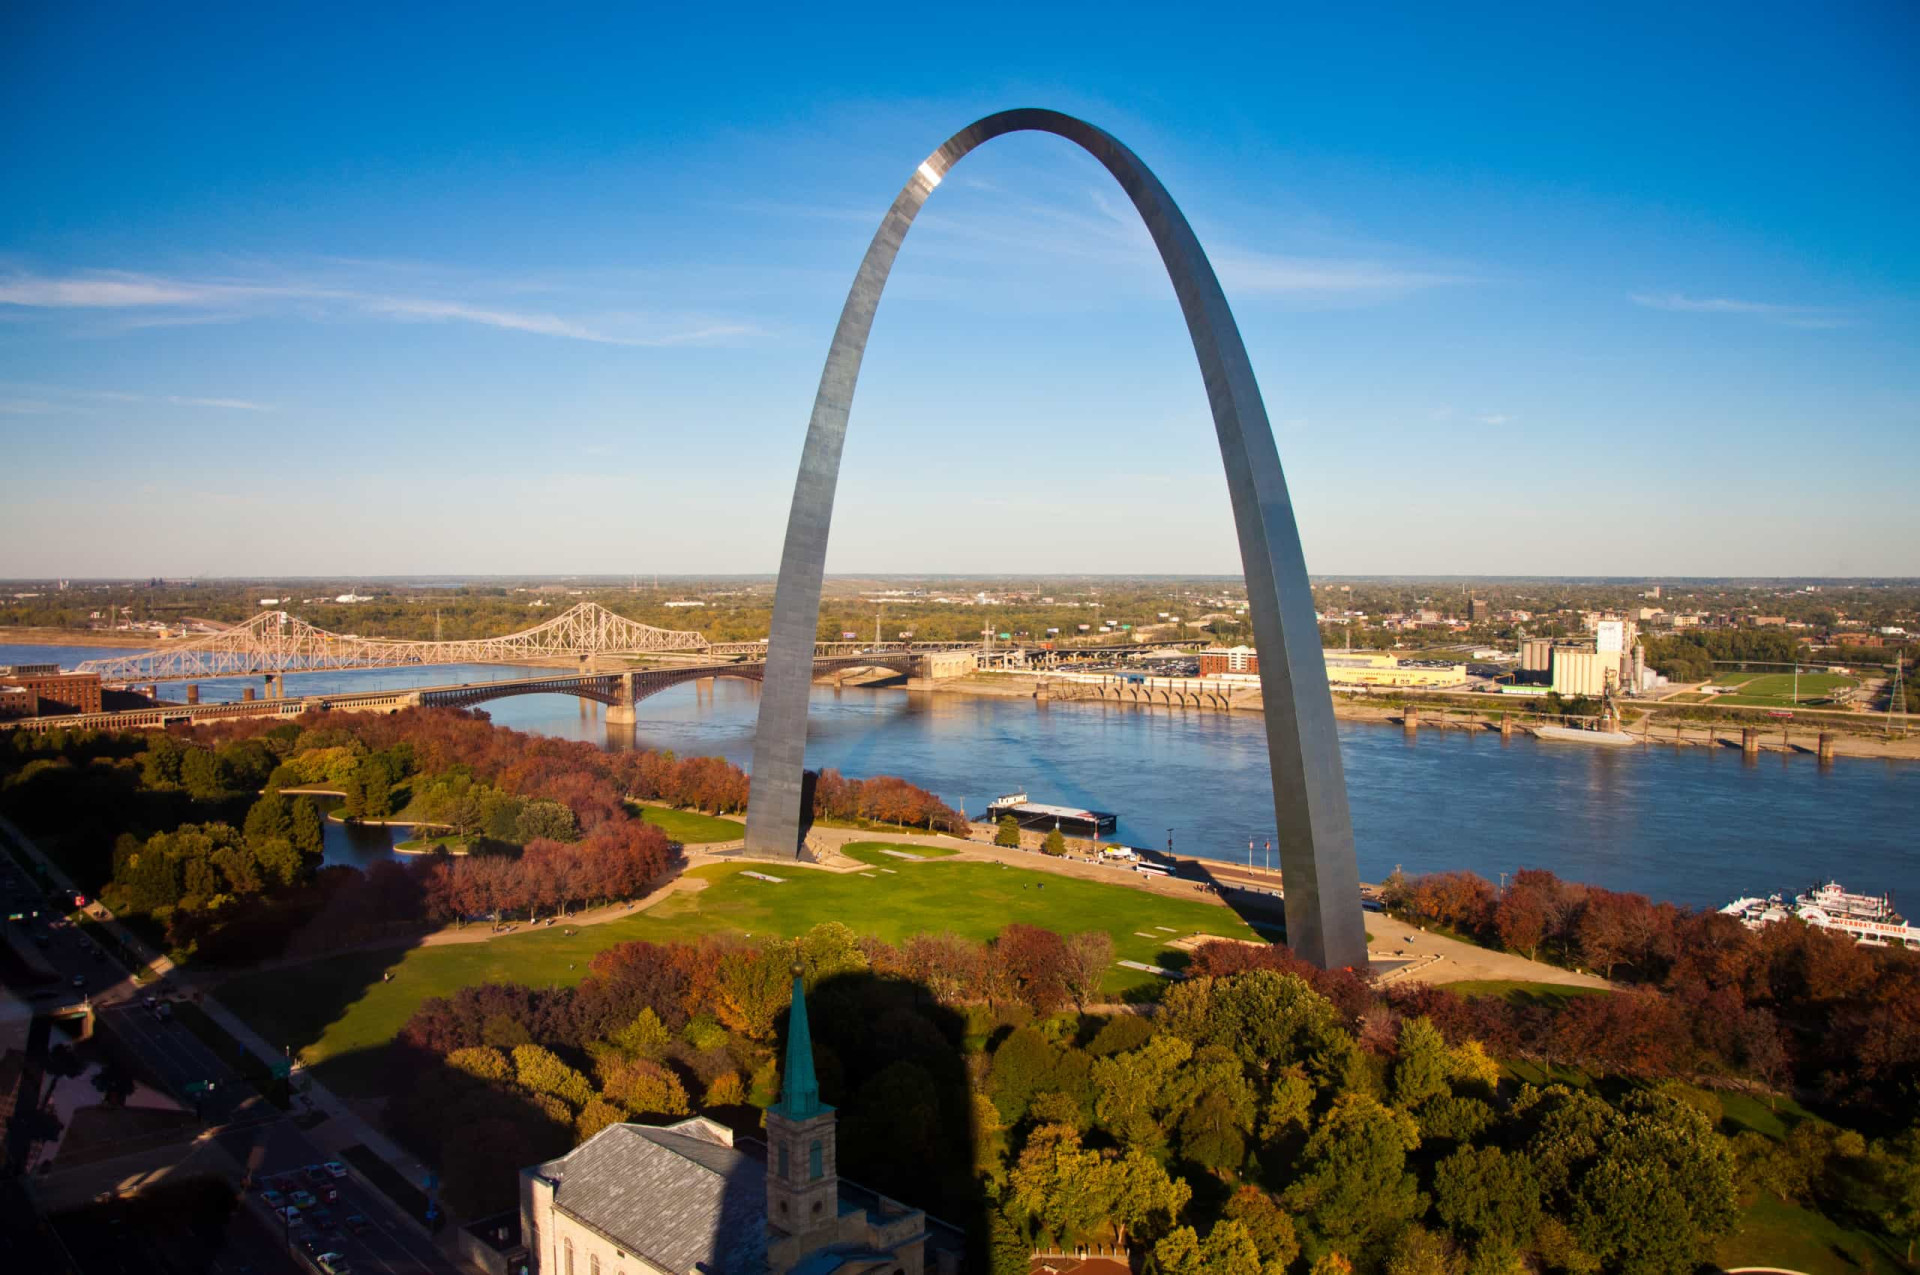 <p>An iconic landmark on the St. Louis <a href="https://www.starsinsider.com/travel/225694/new-horizons-30-most-breathtaking-skylines-in-america" rel="noopener">skyline</a>, the Gateway Arch is the tallest man-made national monument in the United States. It rises 630 feet (102 m) above the riverside city, and visitors can take a thrilling elevator ride to the top for incomparable views.</p><p><a href="https://www.msn.com/en-us/community/channel/vid-7xx8mnucu55yw63we9va2gwr7uihbxwc68fxqp25x6tg4ftibpra?cvid=94631541bc0f4f89bfd59158d696ad7e">Follow us and access great exclusive content every day</a></p>